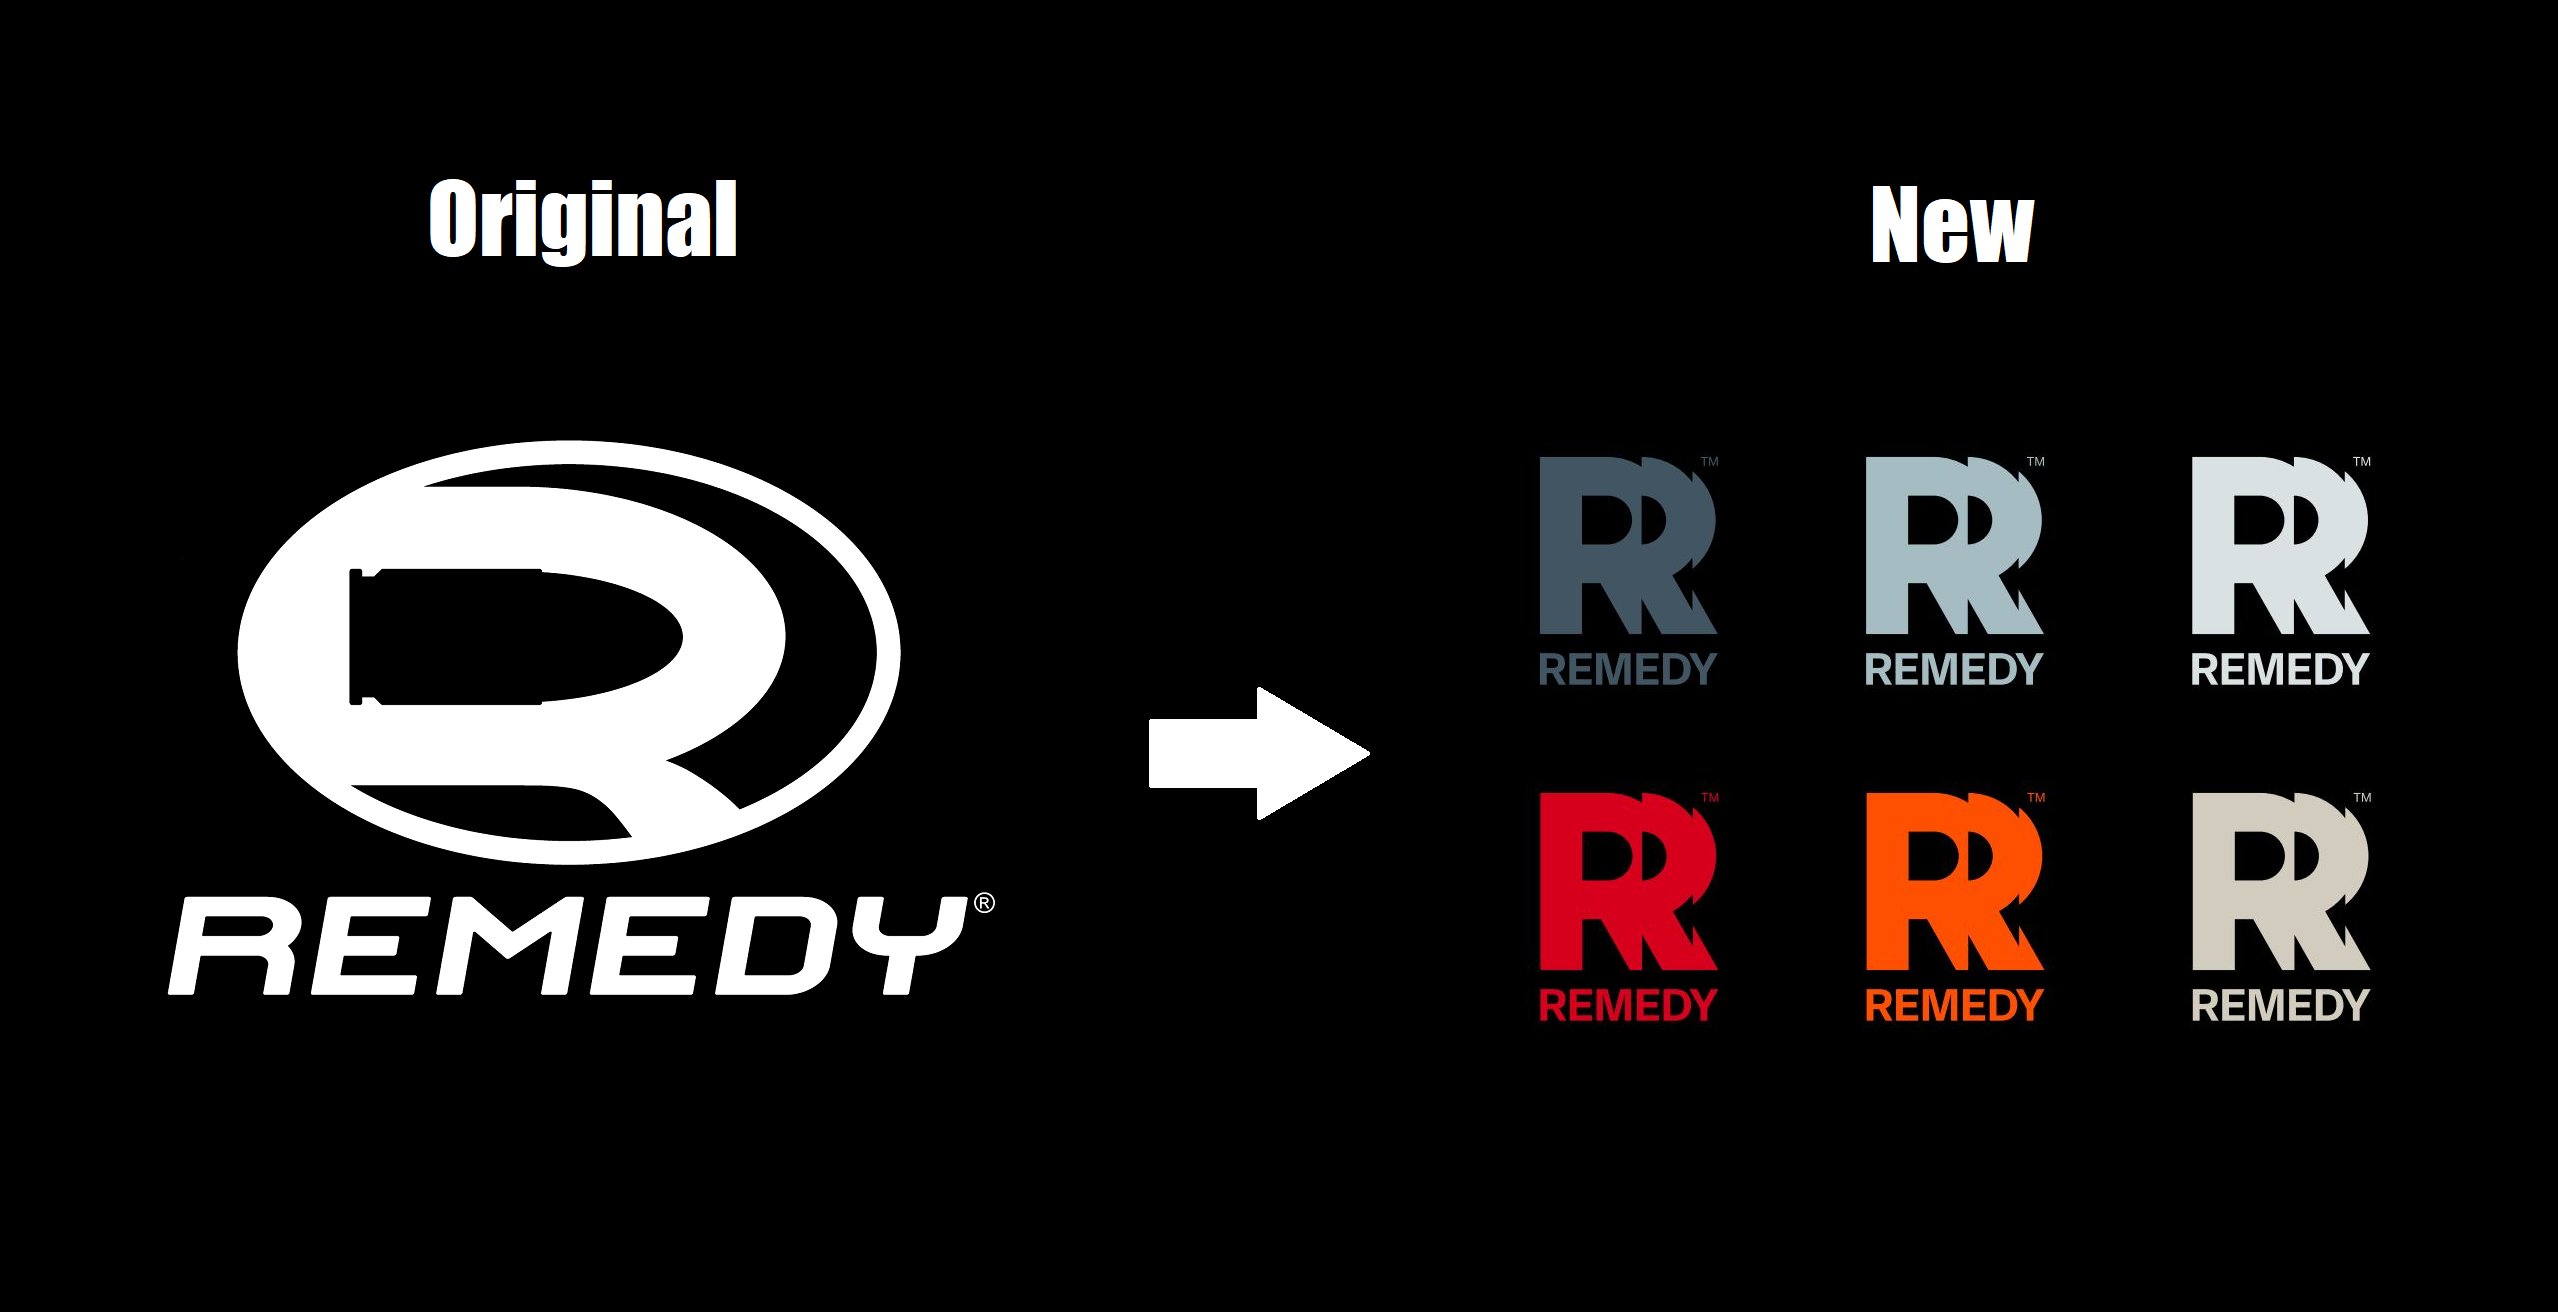 Shinobi602 on Twitter: "Remedy Entertainment has updated its logo for the first time in 20 years More: https://t.co/KvuhnDISW1 https://t.co/BsZ7Eplehg" / Twitter